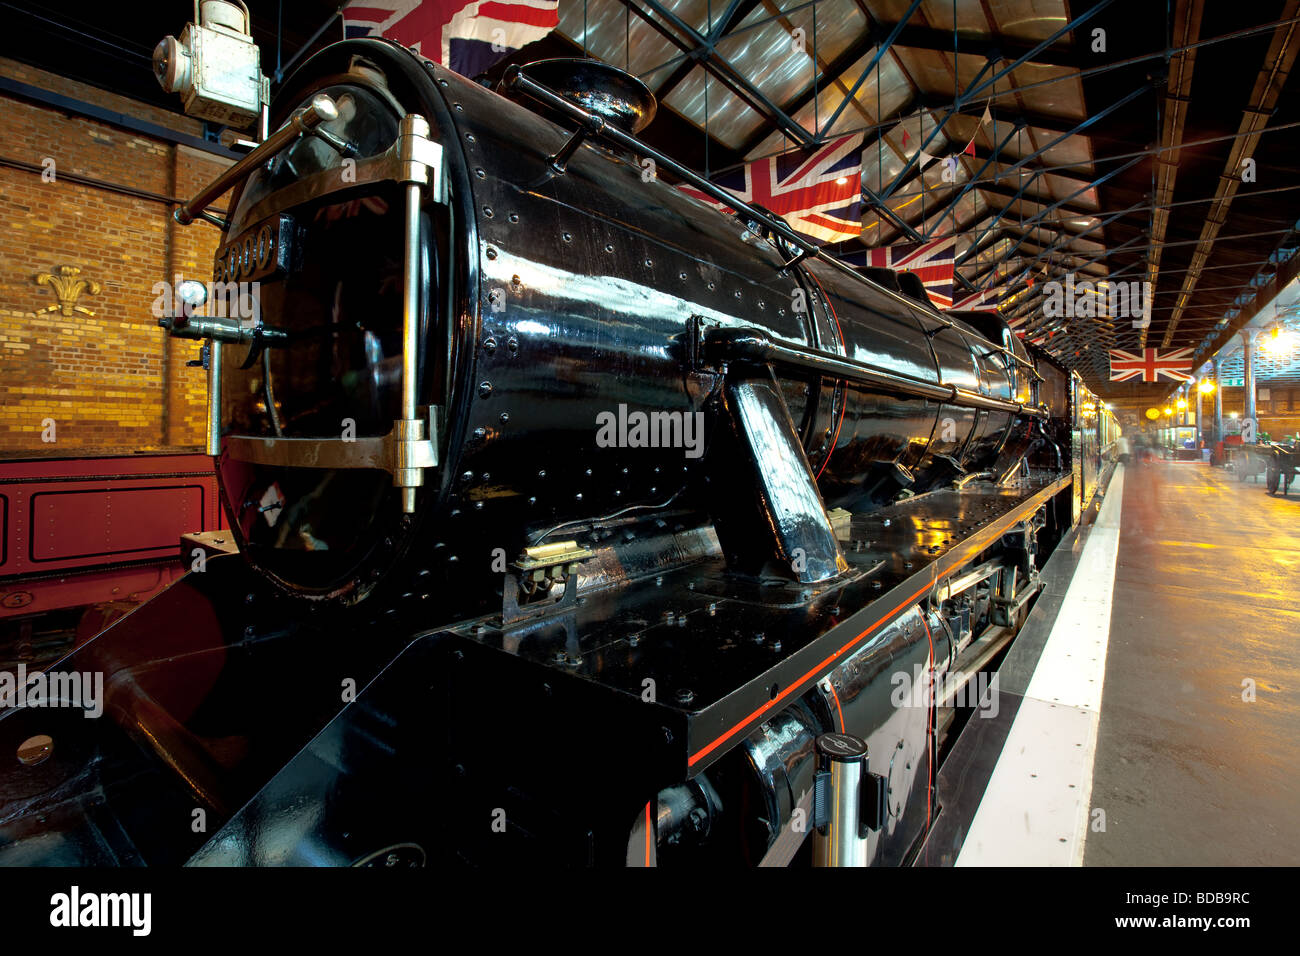 An old steam locomotive in the National Railway Museum in York Stock Photo